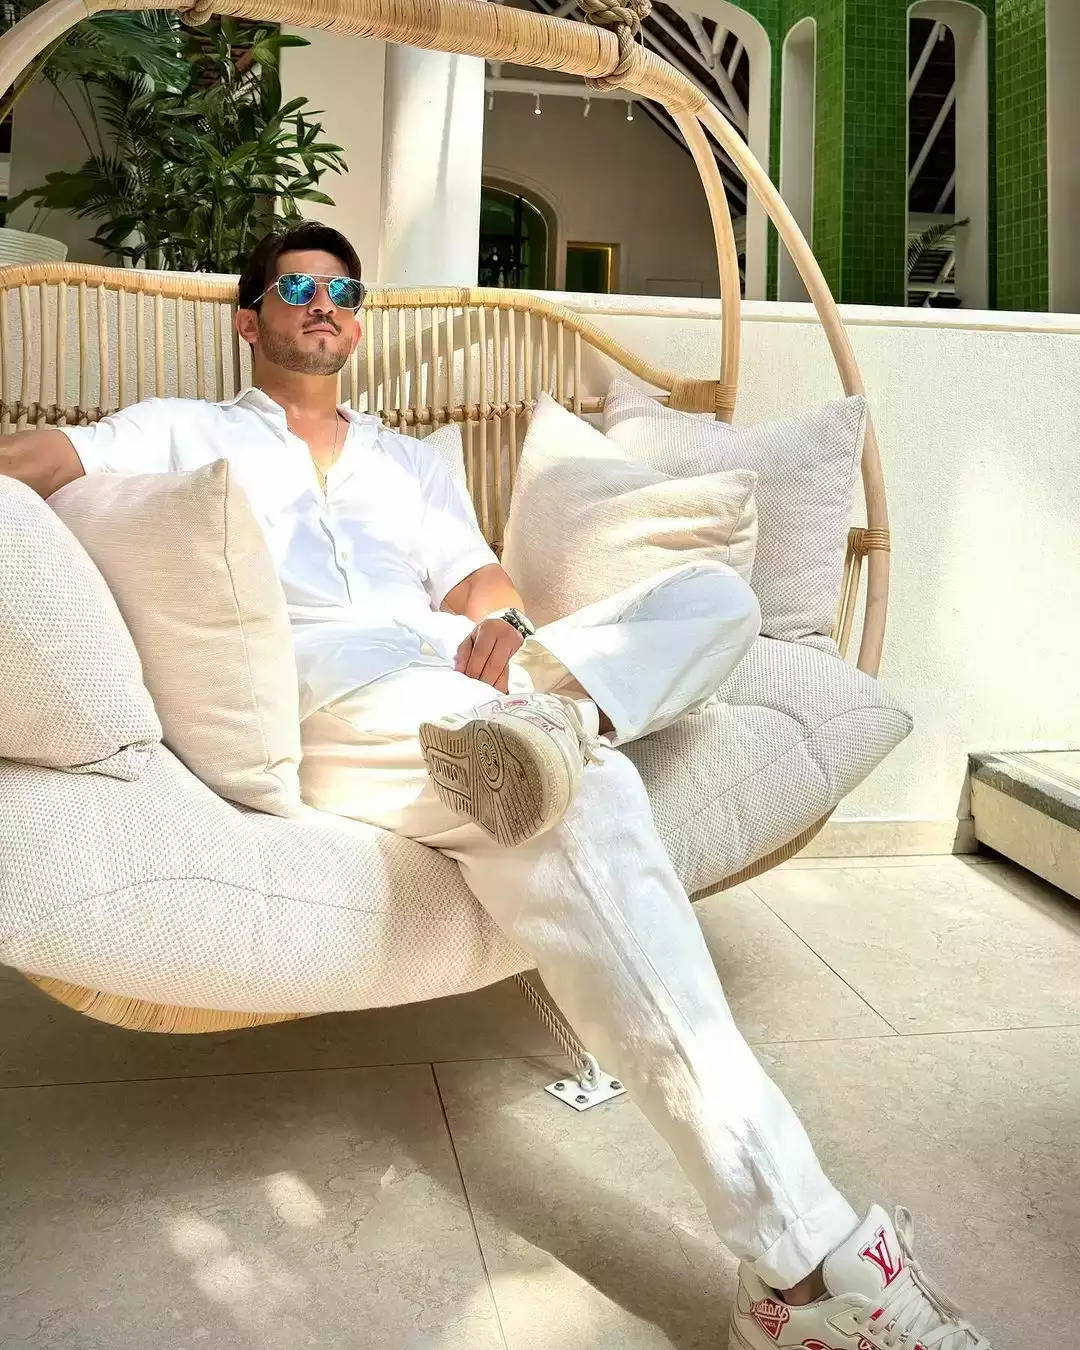 Arjun Bijlani's Refreshing Mauritian Getaway: Balancing Work and Family Time is very important to bounce back feeling energized"